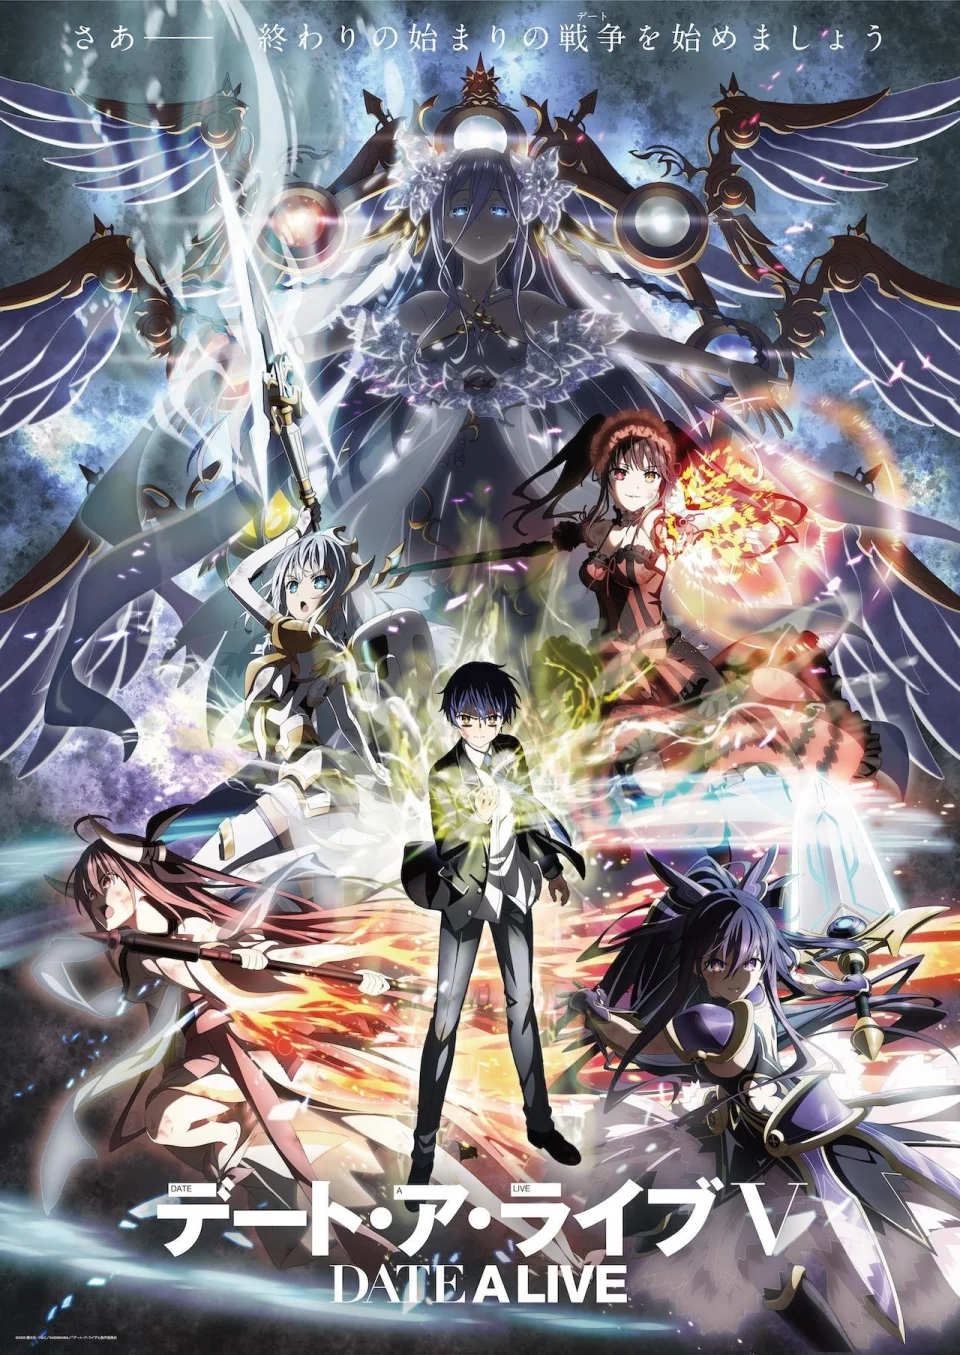 Date A Live Thrills With Trailer For Its Fifth Season